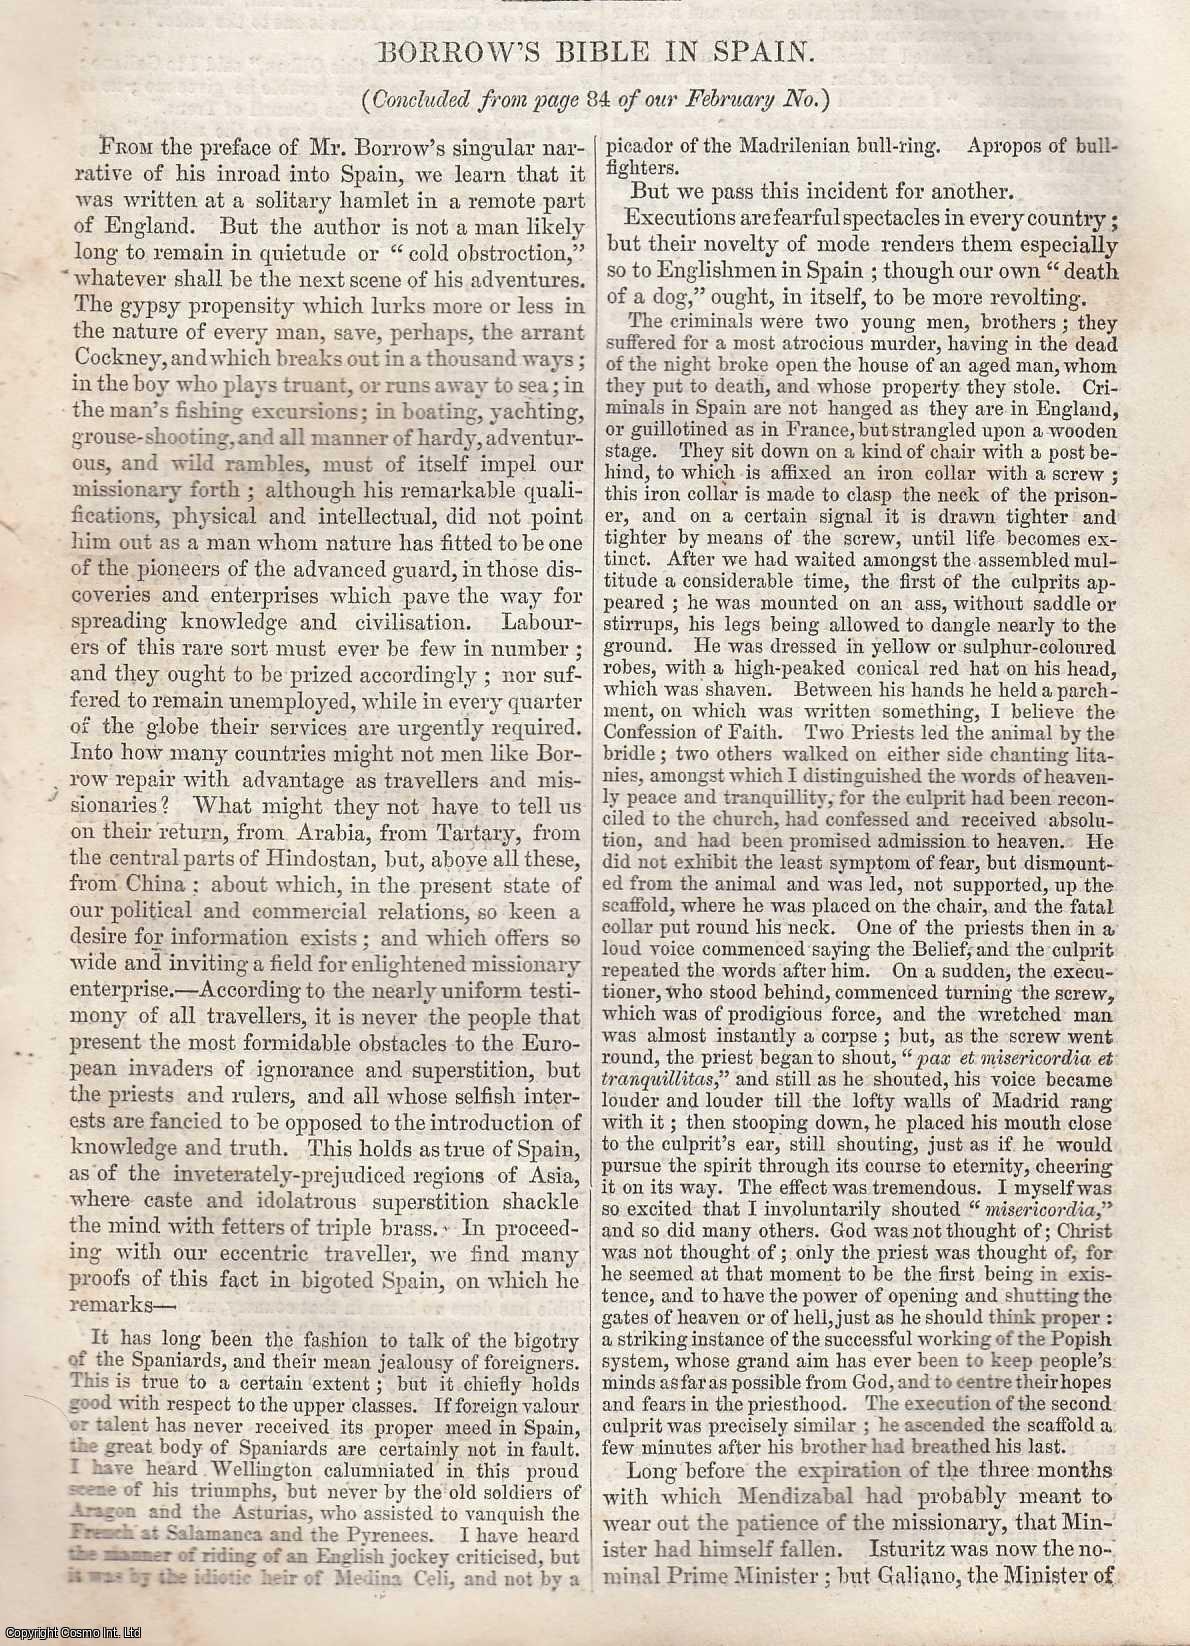 Johnstone, Christian - Borrow's Bible in Spain (Part 2, concluded.). An original article from Tait's Edinburgh Magazine, 1843.